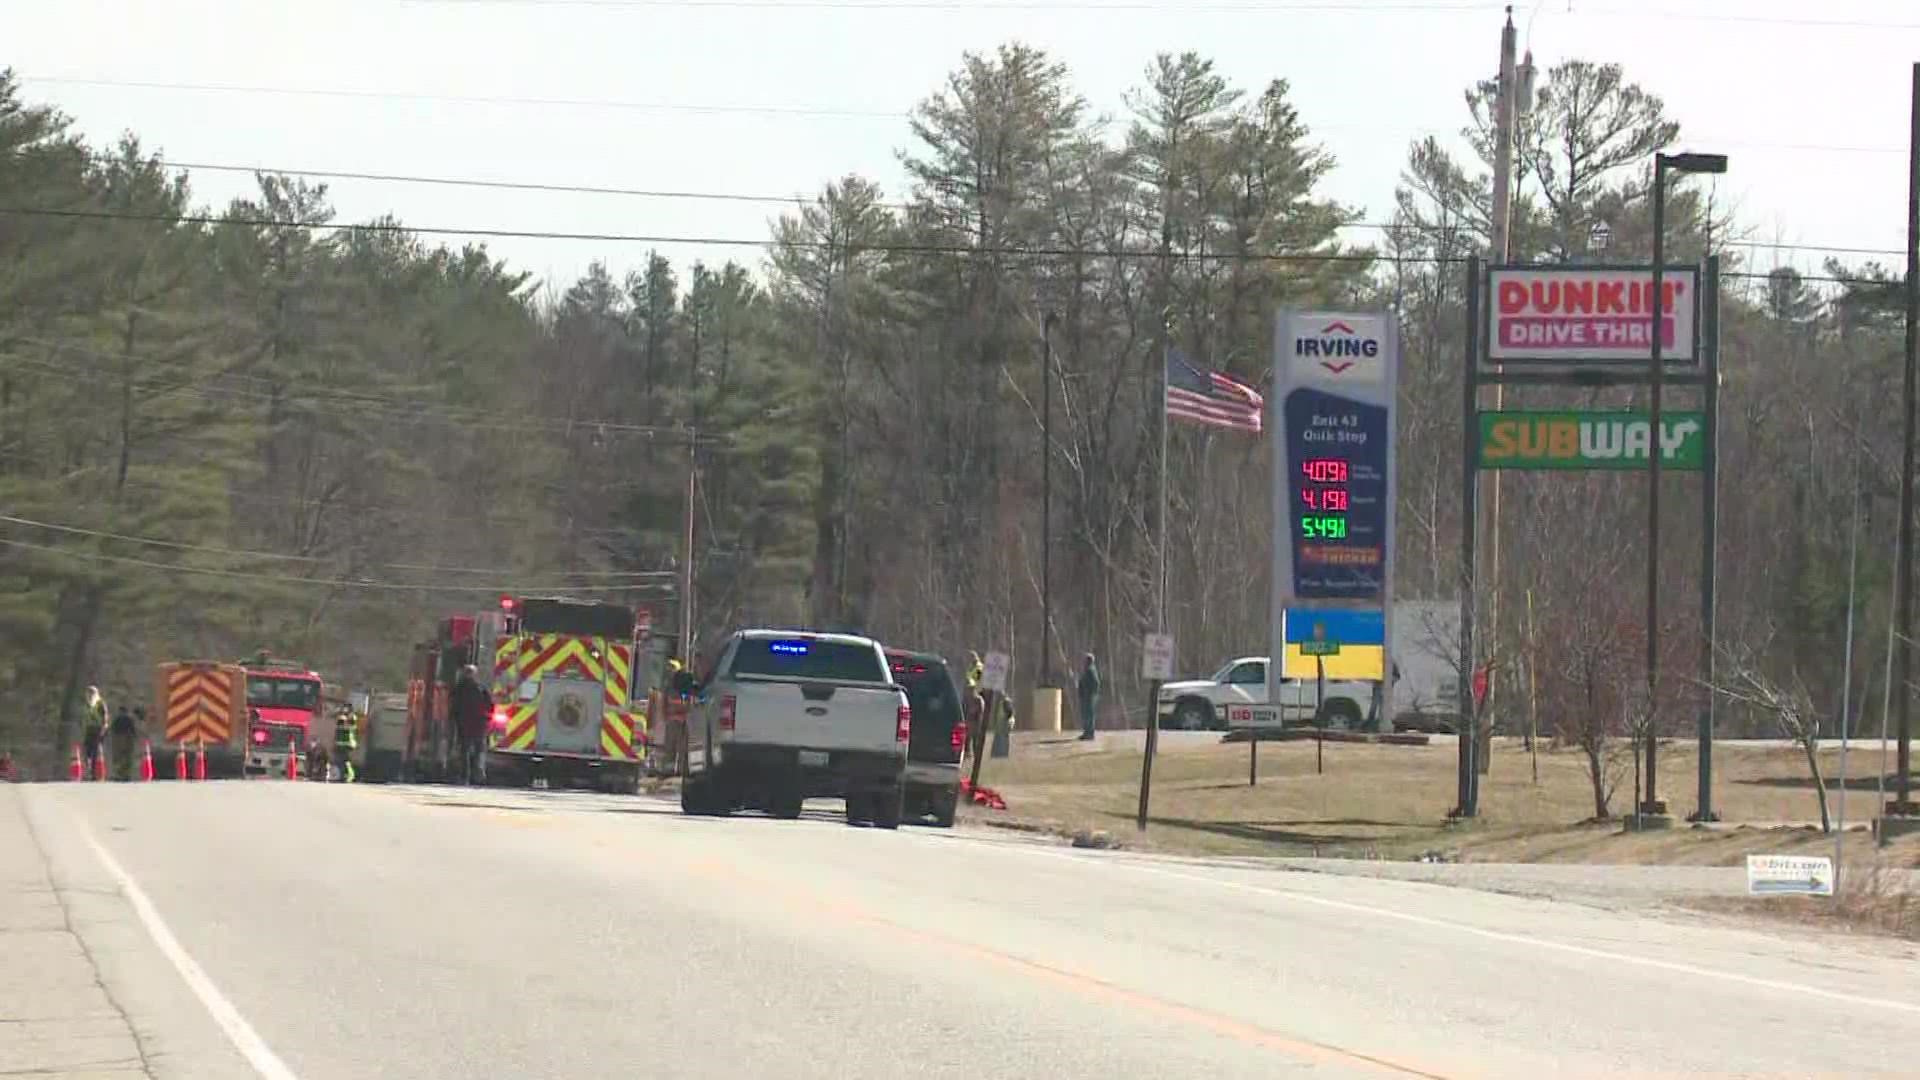 First responders and state agencies are investigating, according to release from the Sagadahoc County Emergency Management Agency.